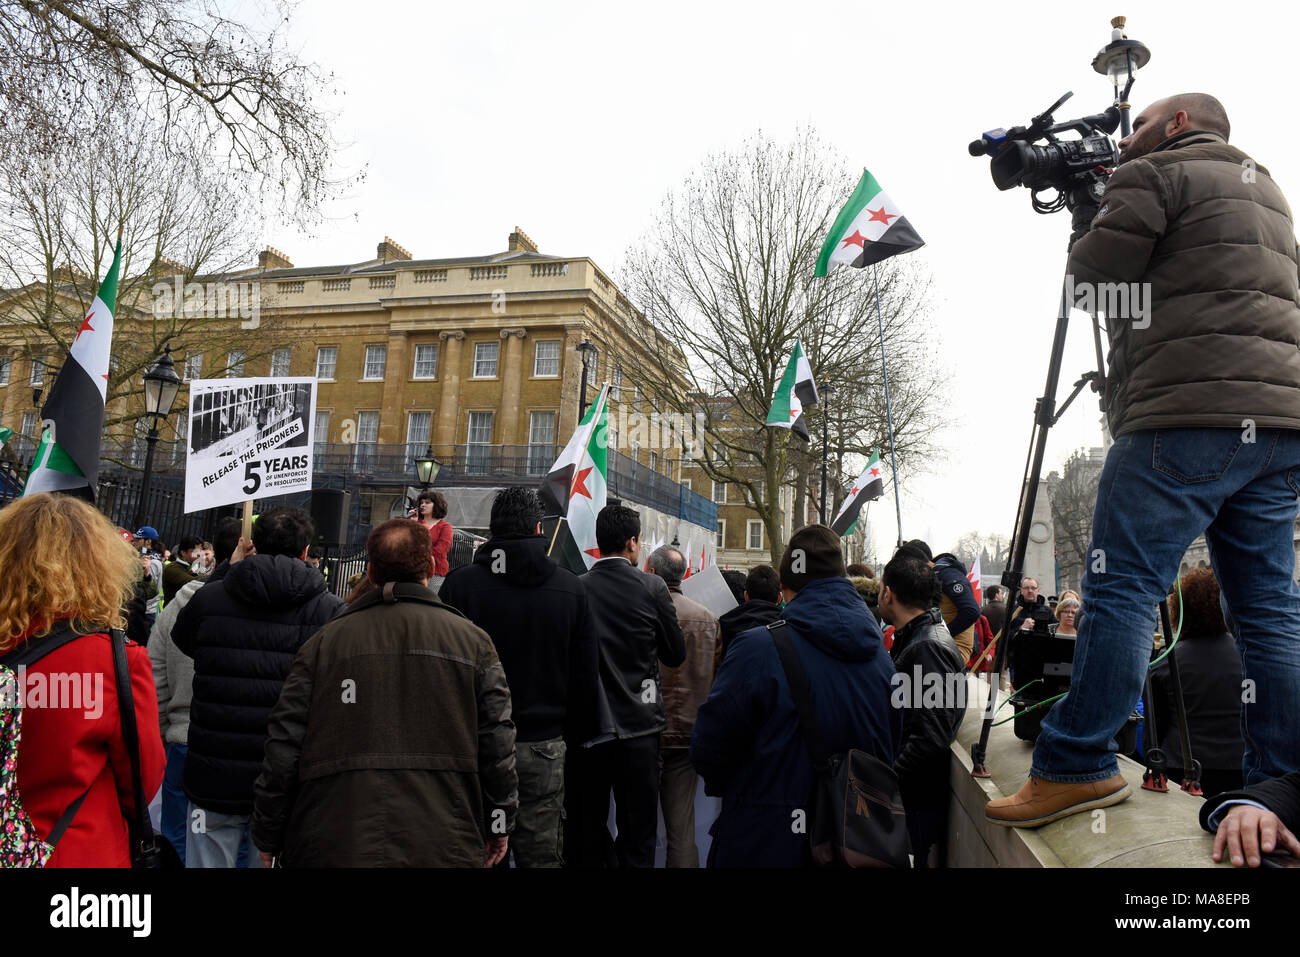 People gathered to protest against Assad regime during the 5th Anniversary of the Syrian Revolution, London, UK. Stock Photo